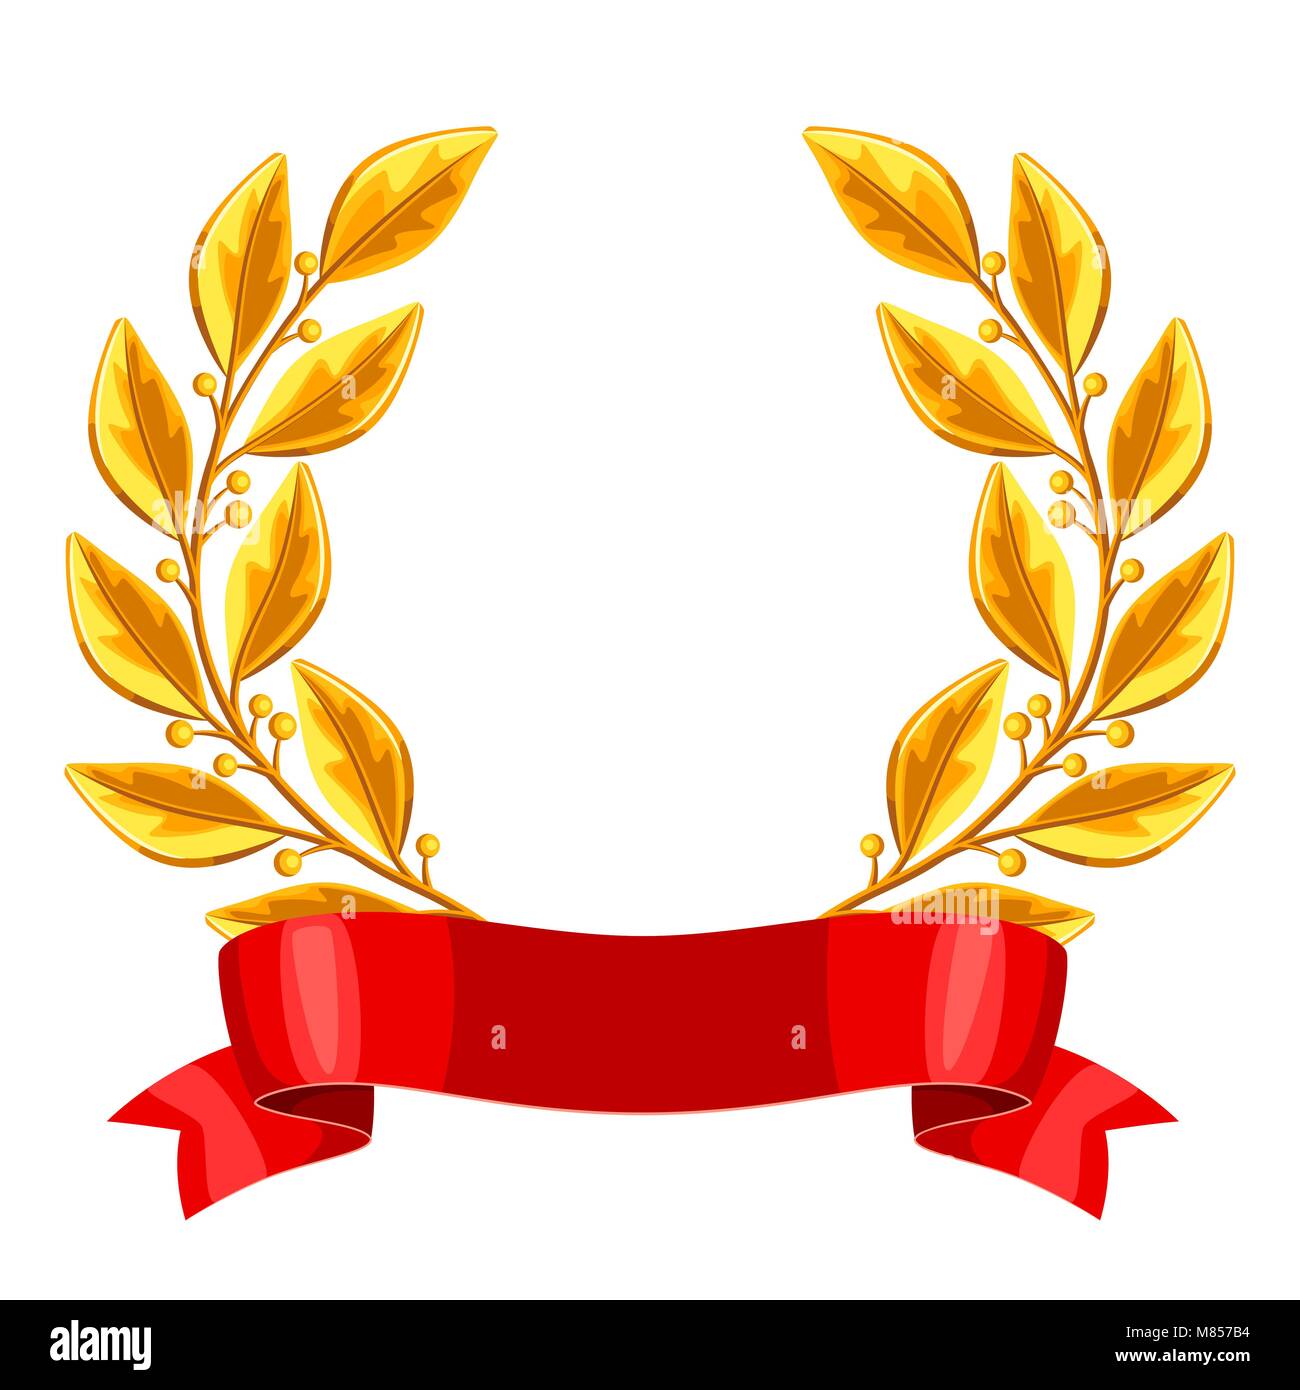 Realistic gold laurel wreath with red ribbon. Illustration of award for sports or corporate competitions Stock Vector